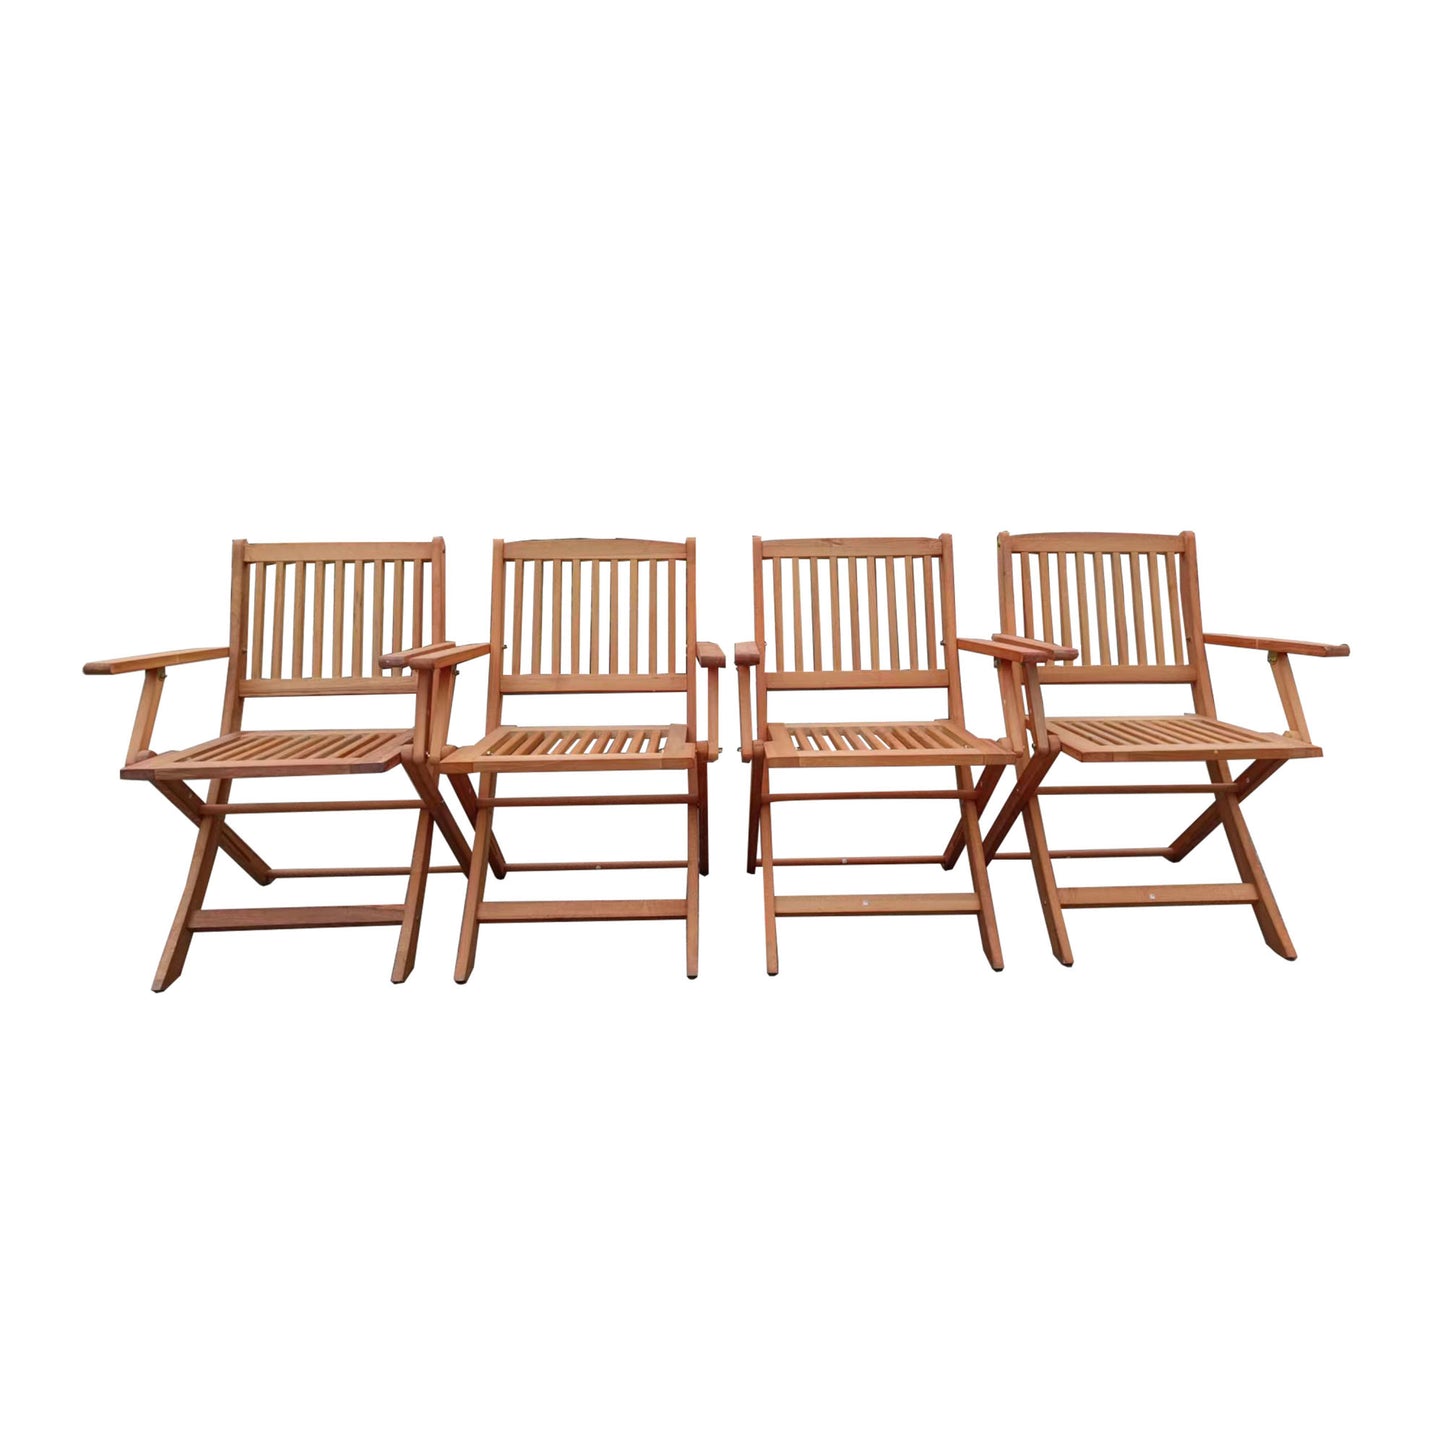 Foldable Patio Dining Set, 4 Folding Chairs, Indoor and outdoor universal, Teak